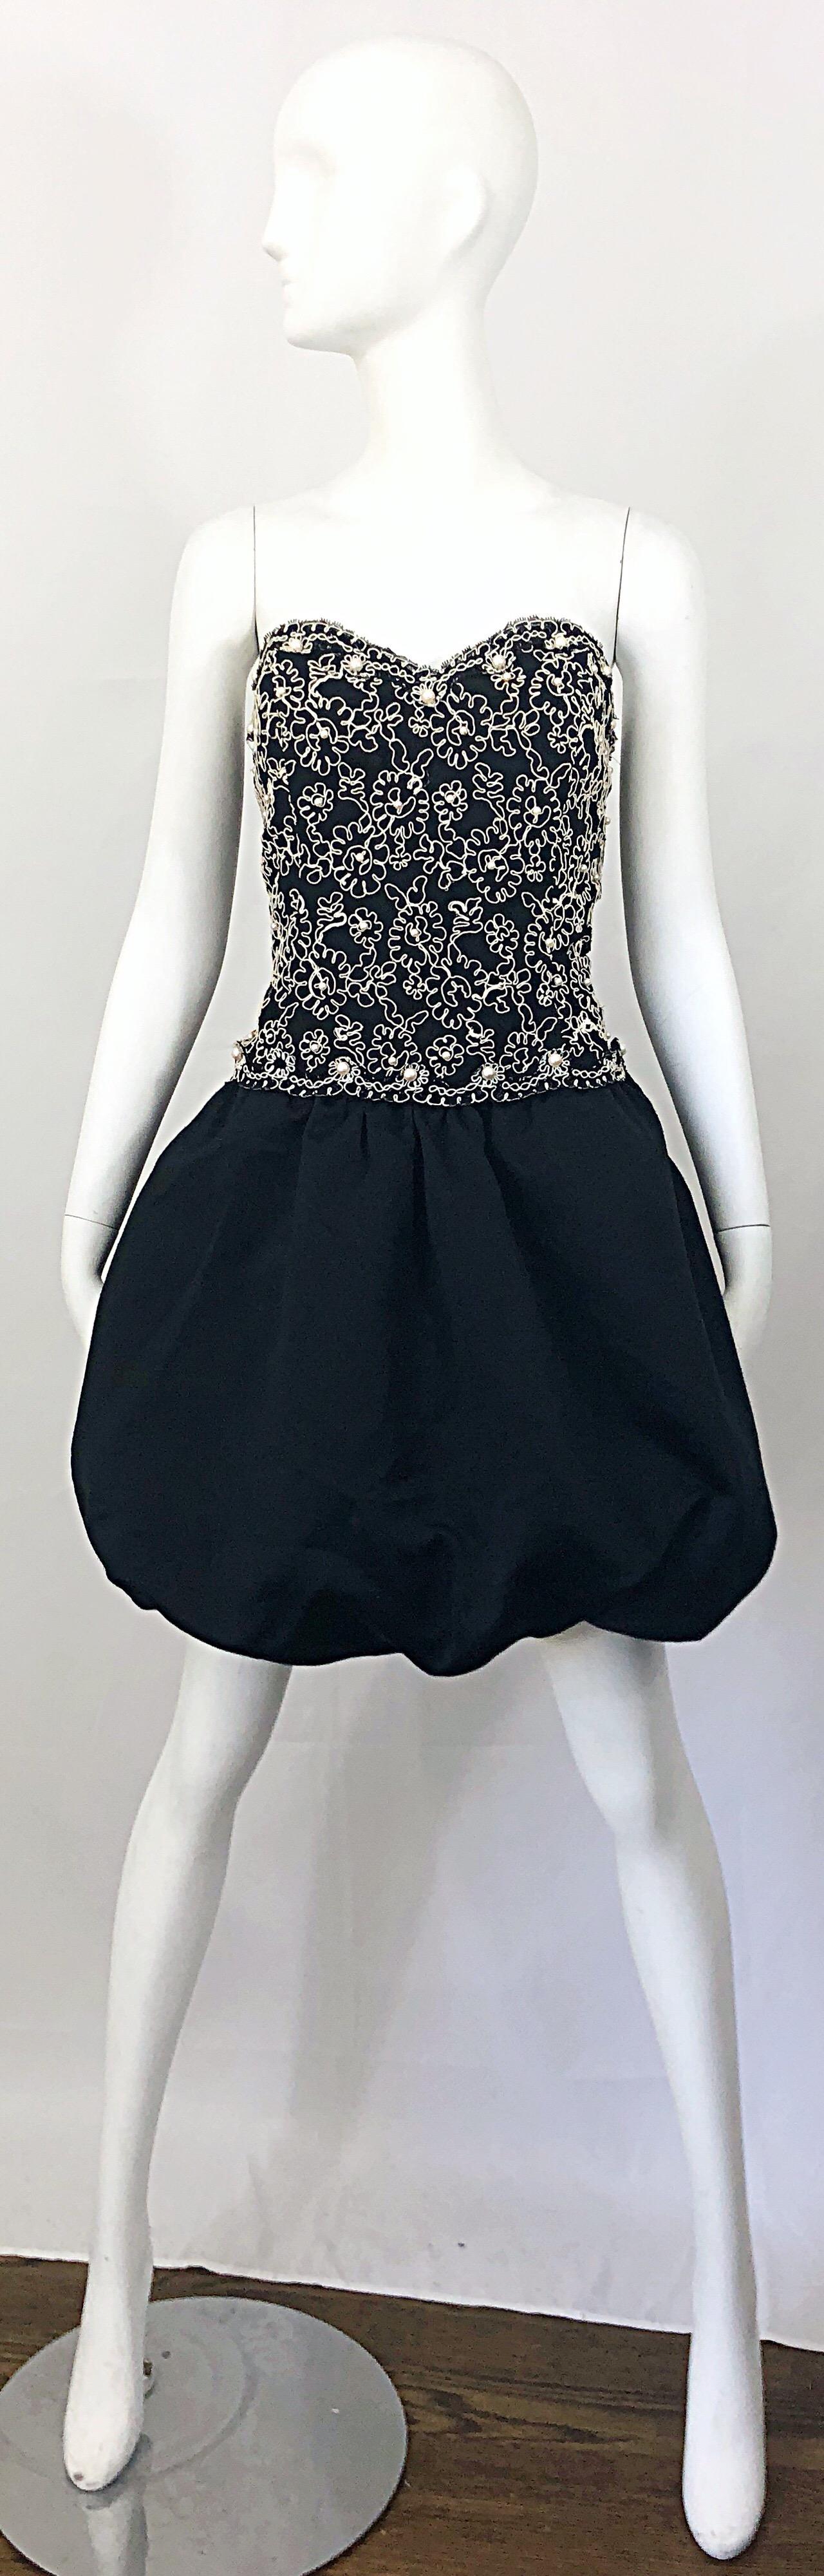 Chic vintage 80s black and white pearl encrusted Size 12 strapless embroidered party pouf dress! Features a fitted boned black bodice with white embroidery and hand-sewn pearls throughout. Forgiving pouf bubble skirt hides any 'problem' areas.